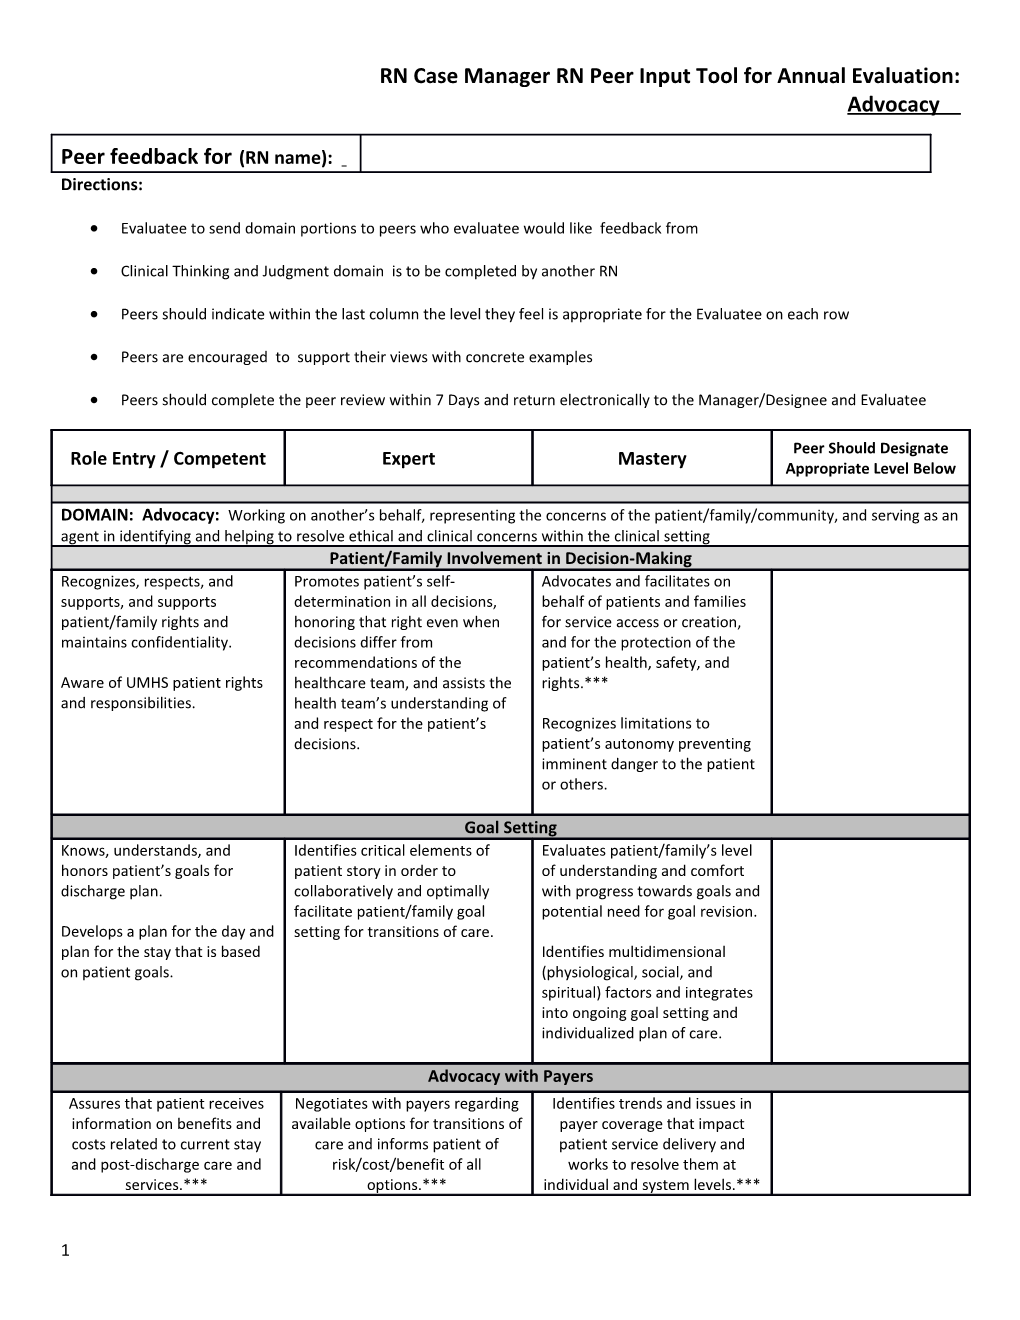 RN Case Managerrn Peer Input Tool for Annual Evaluation: Advocacy